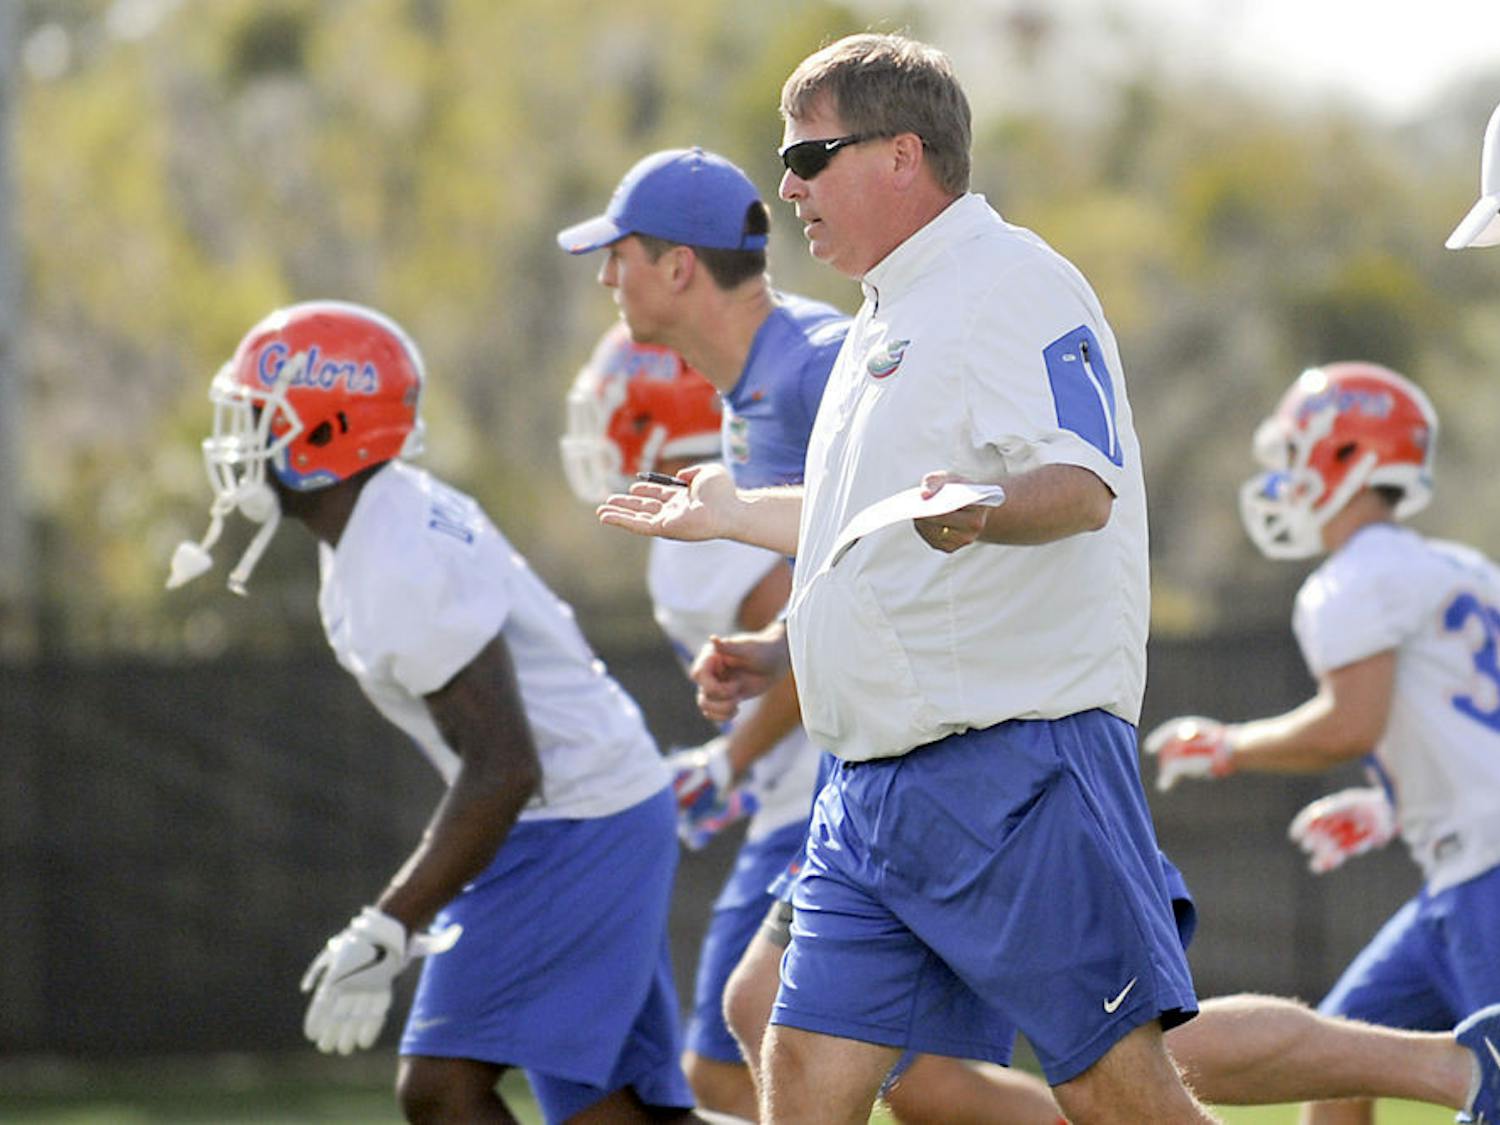 Jim McElwain instructs his players during Florida's Spring practice at the Sanders Practice Fields on March 9, 2016.